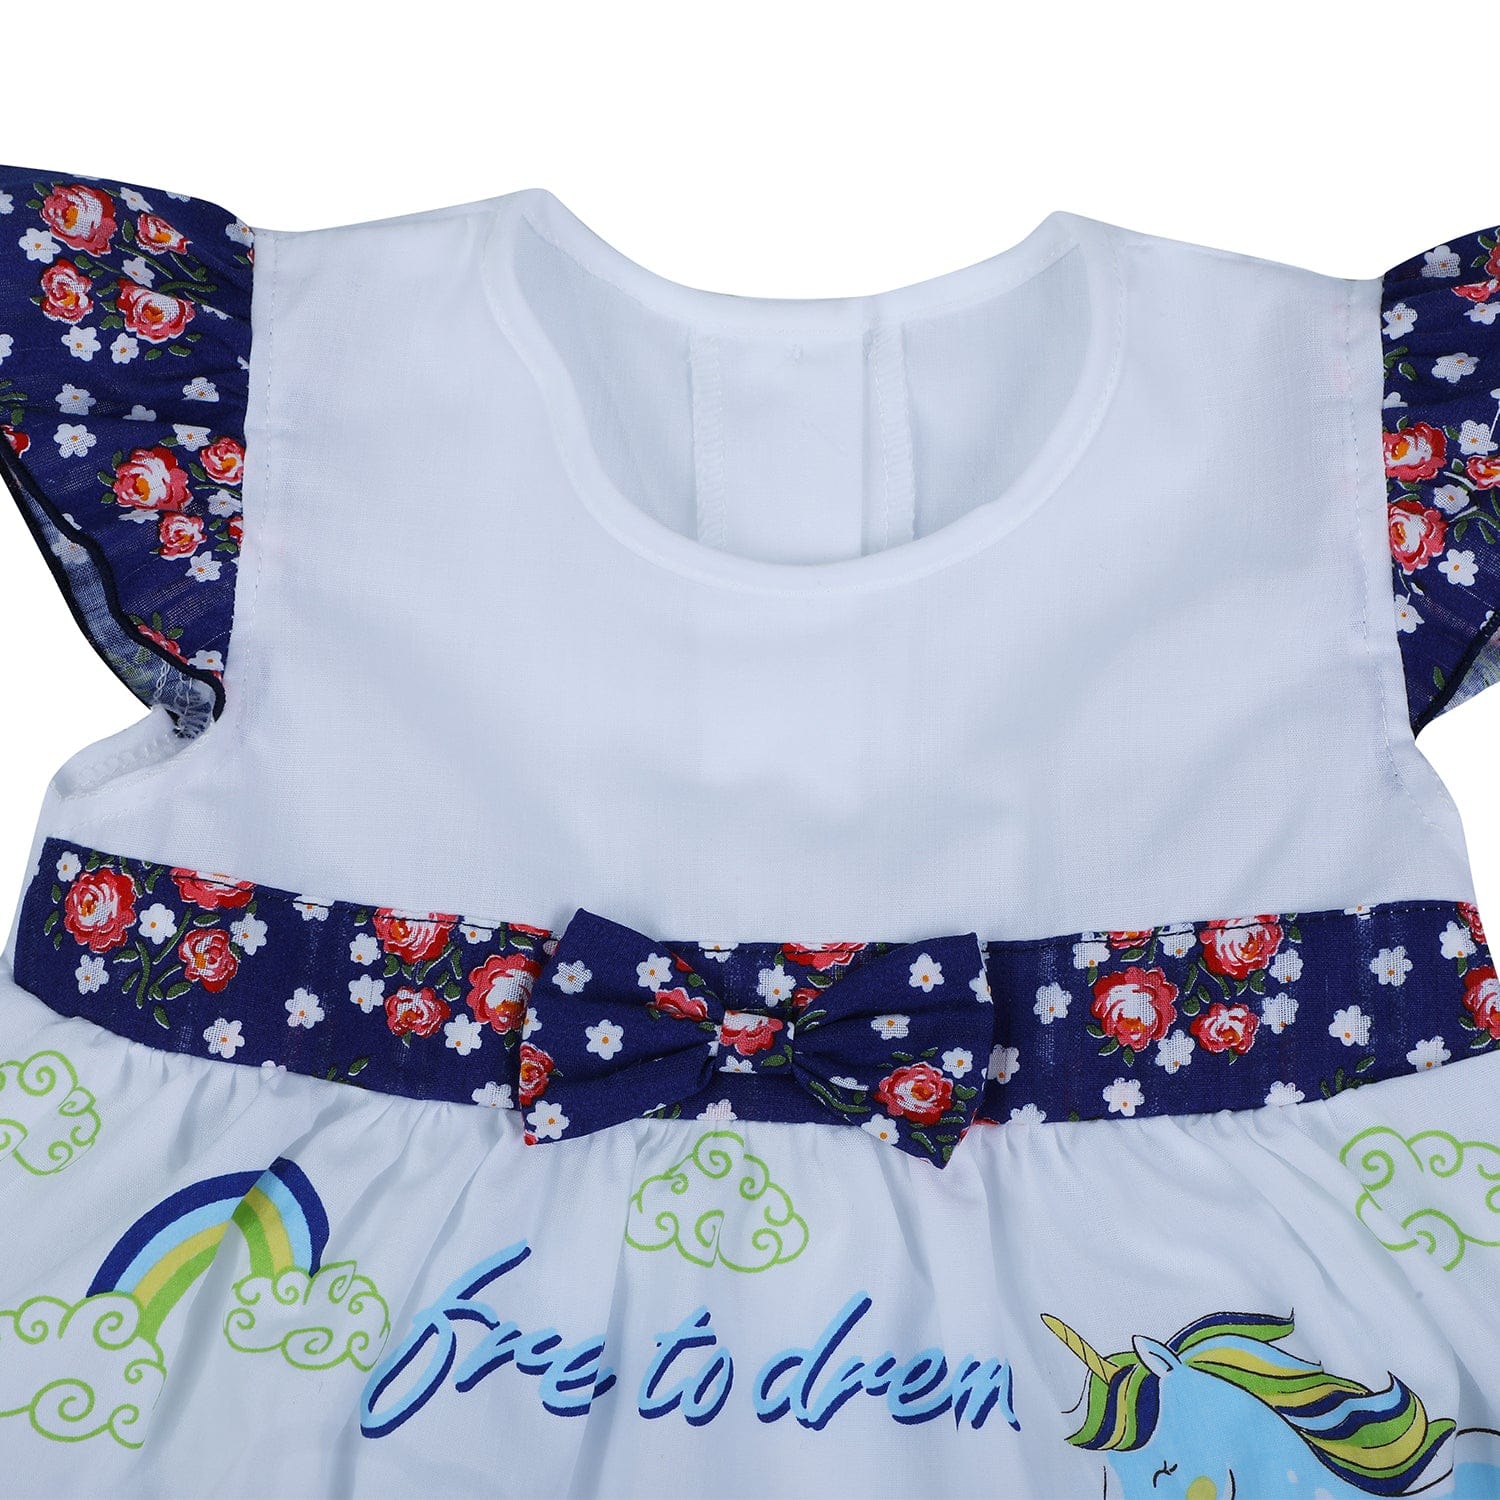 Baby Moo Floral Unicorn Flutter Sleeves Knee Length Frock - Blue - Baby Moo